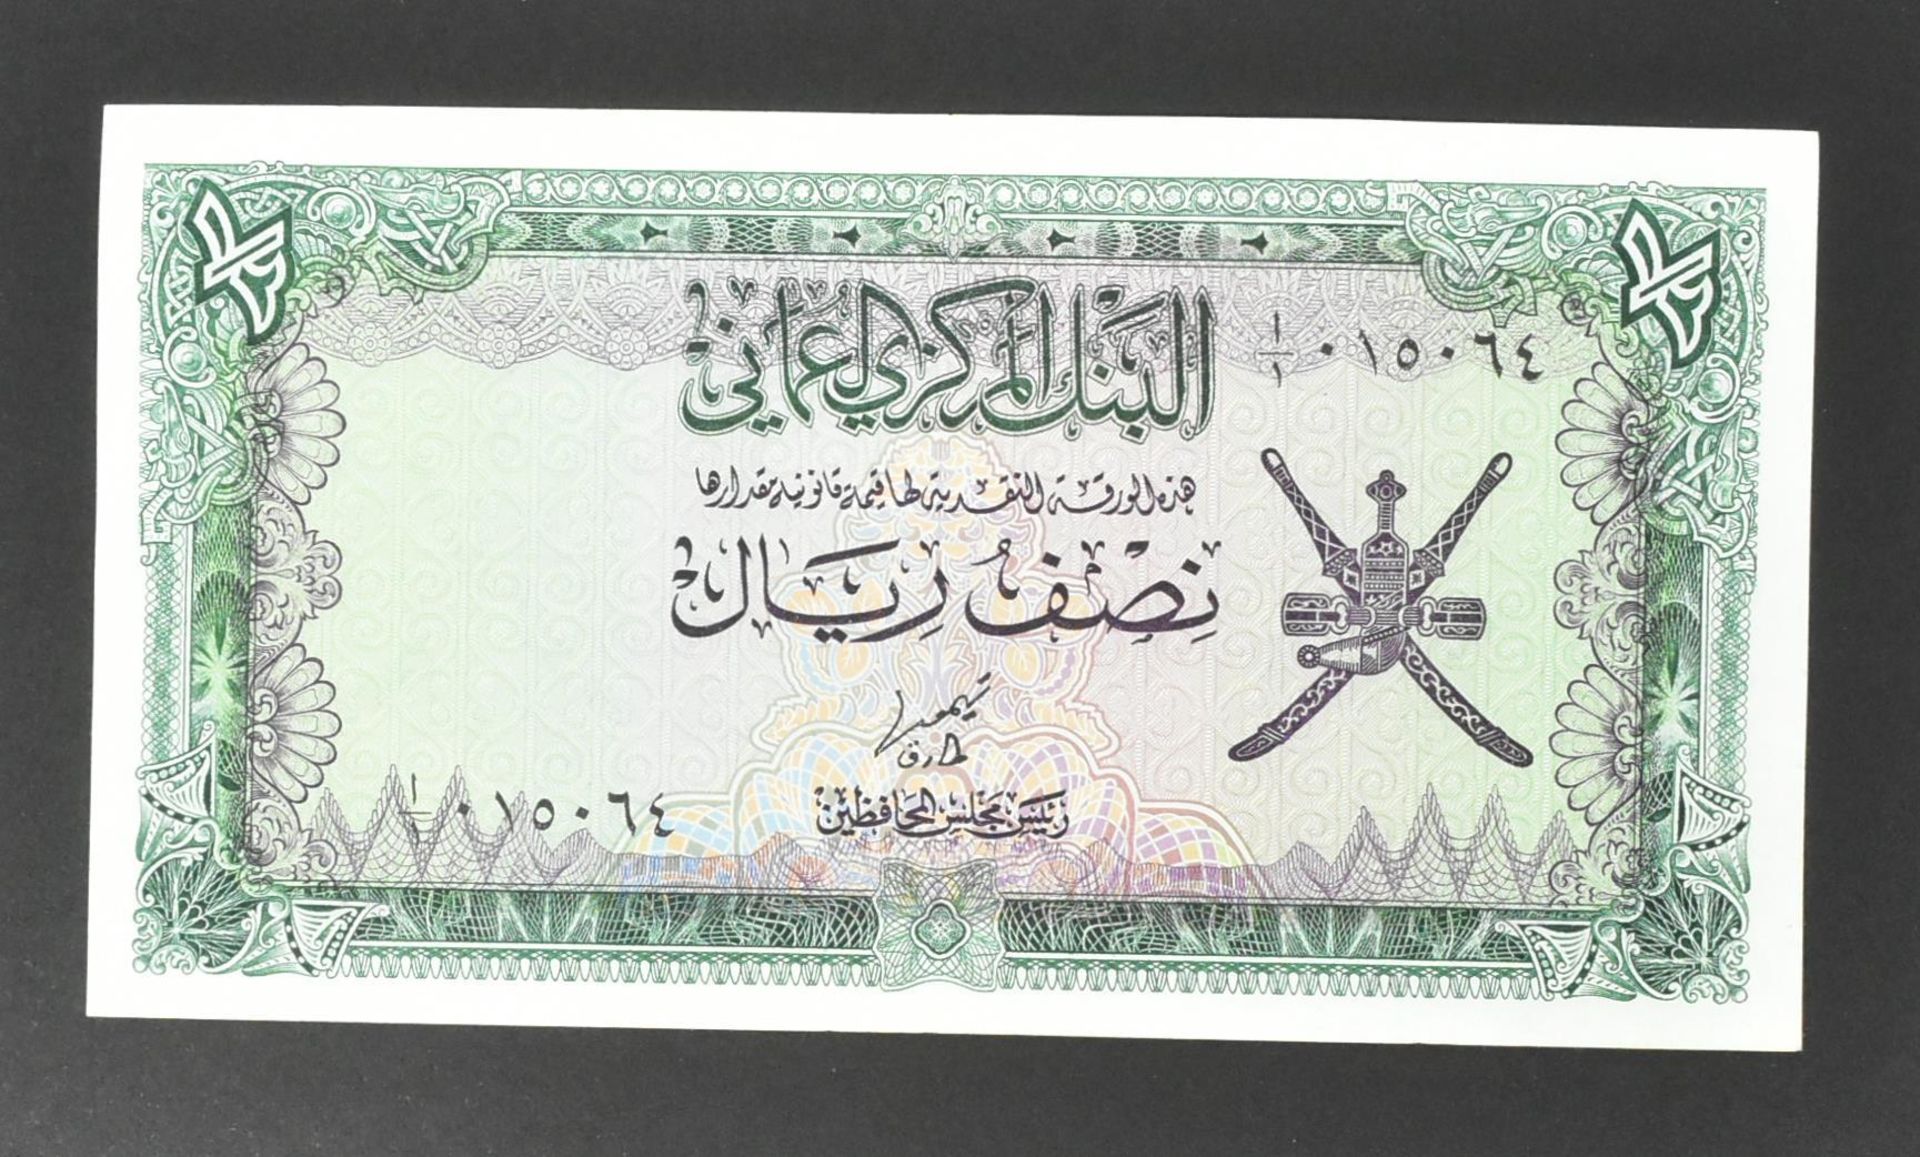 COLLECTION OF INTERNATIONAL UNCIRCULATED BANK NOTES - OMAN - Image 5 of 51